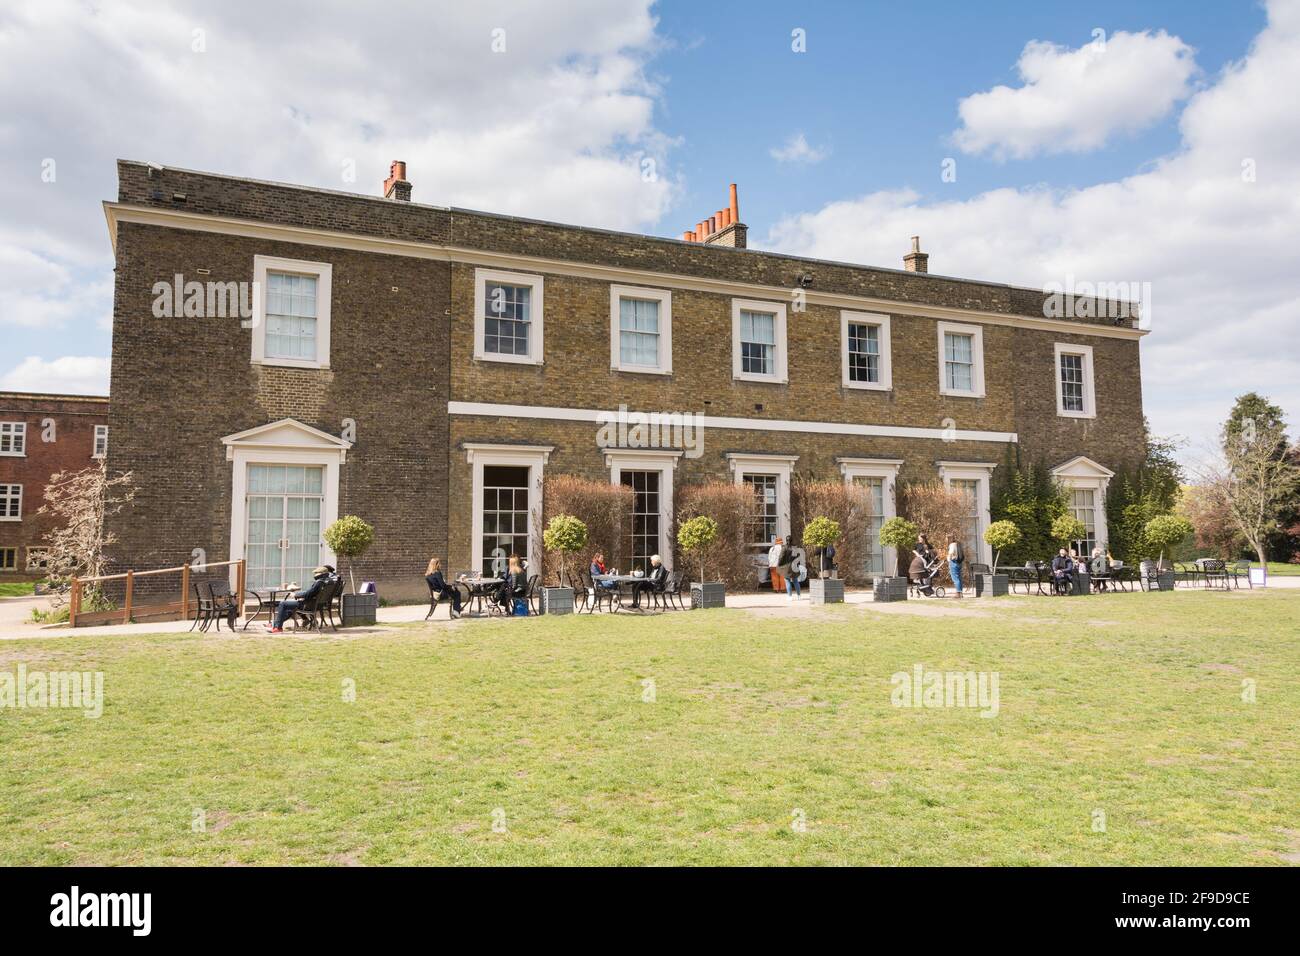 People eating al fresco at Fulham Palace, the historic house and gardens of the Bishop of London on Bishop's Avenue, Fulham, London, England, U.K. Stock Photo